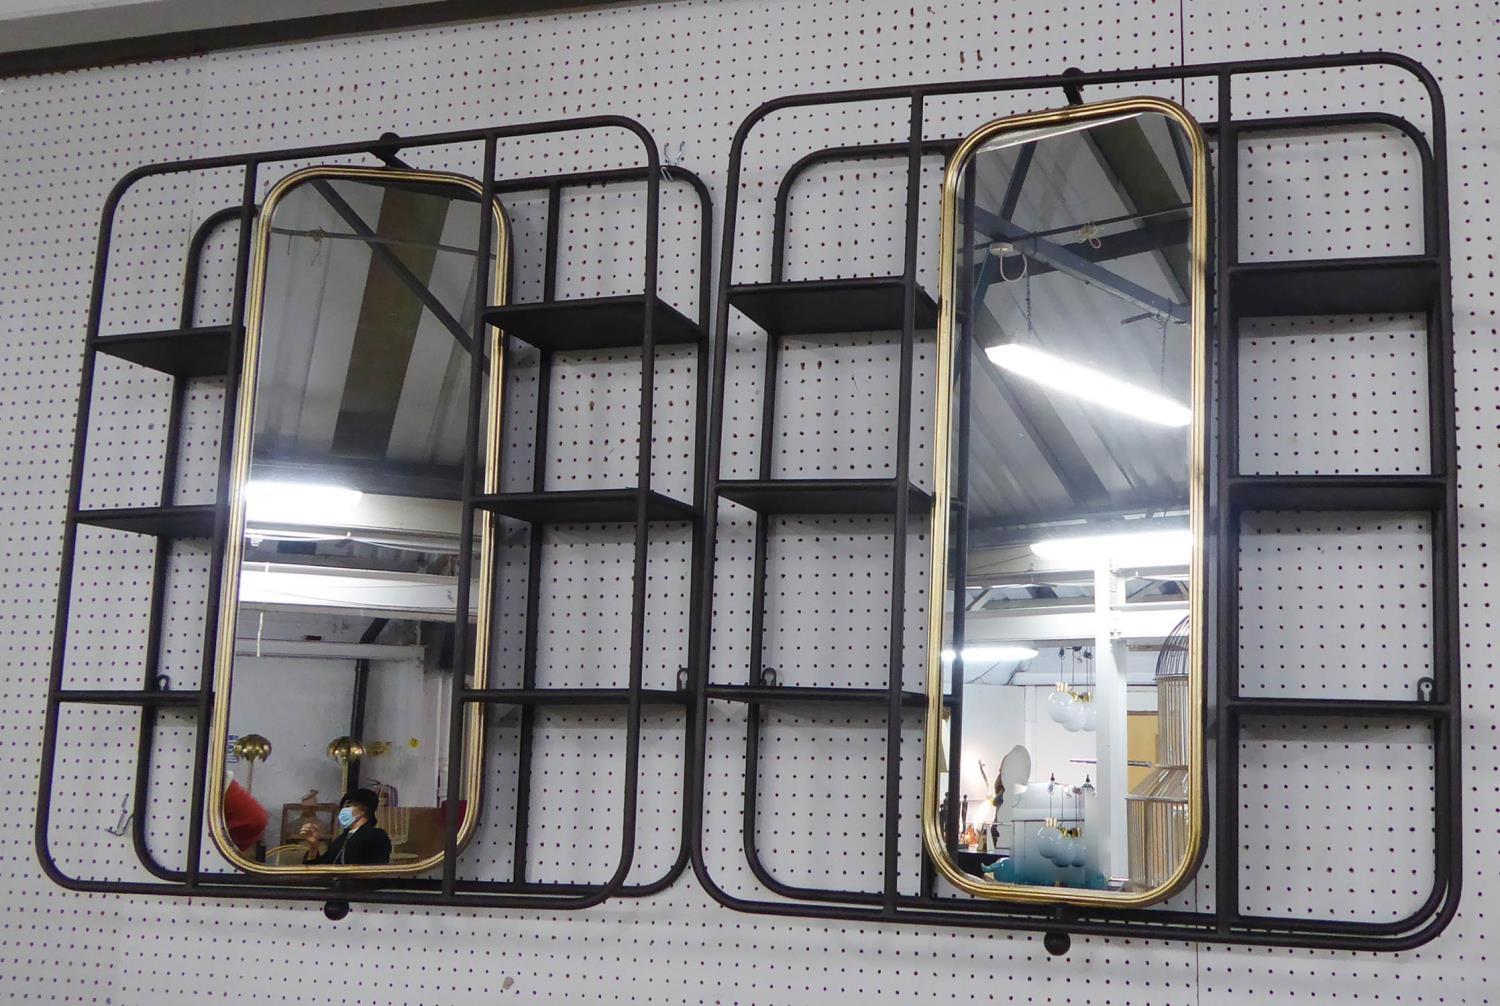 WALL HANGING VANITY MIRRORS, articulating mirror plate with shelves. (2)